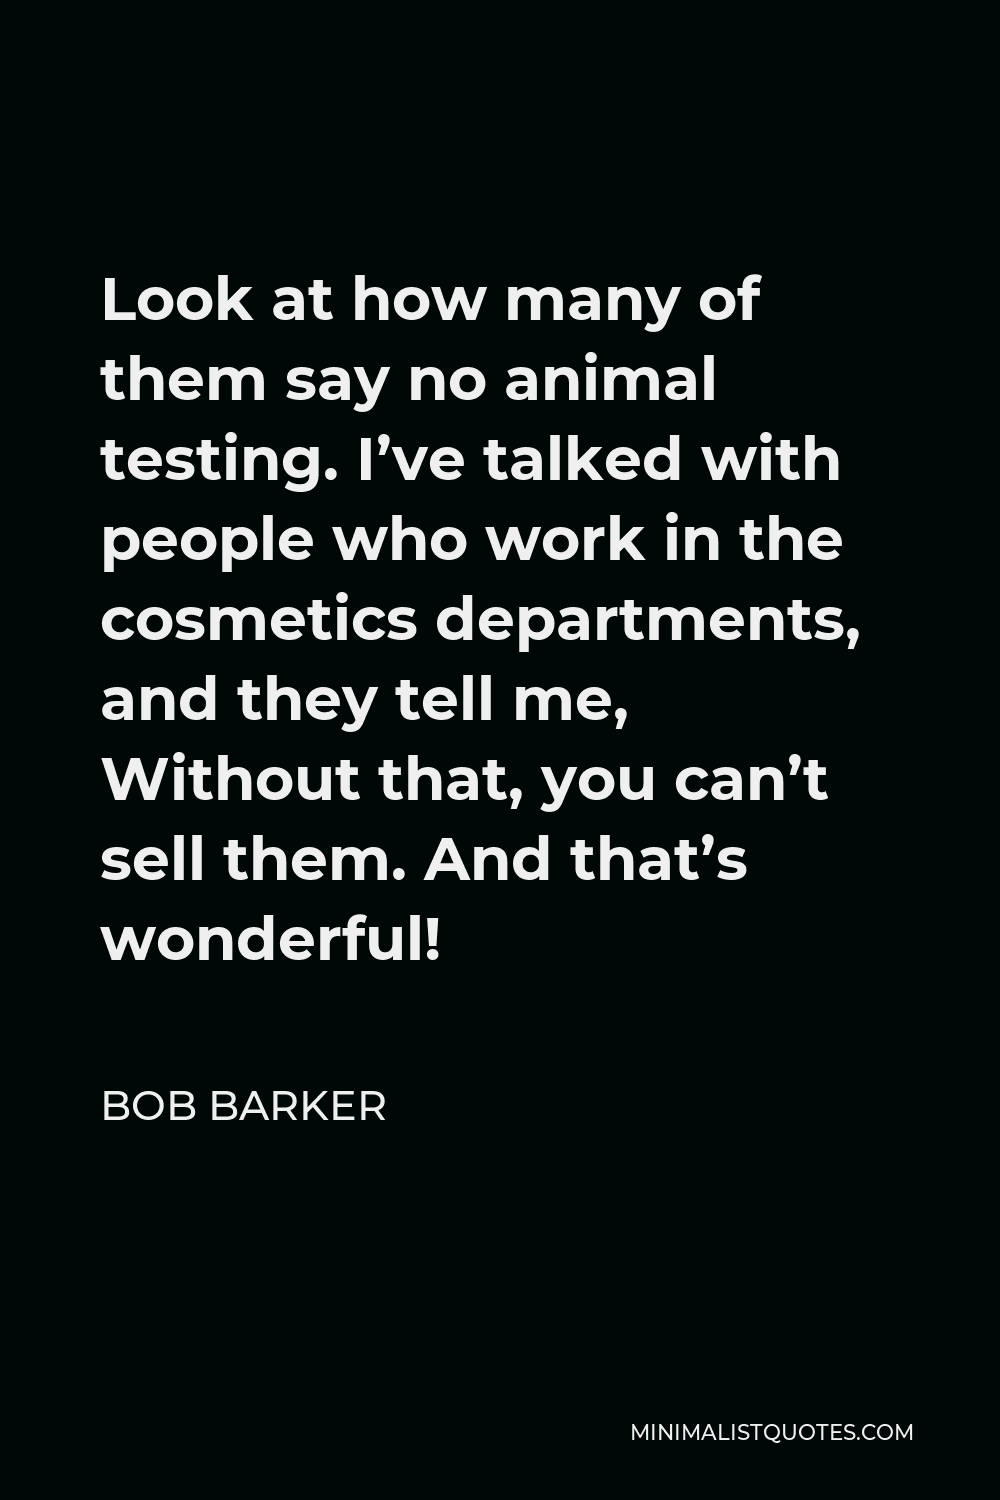 Bob Barker Quote - Look at how many of them say no animal testing. I’ve talked with people who work in the cosmetics departments, and they tell me, Without that, you can’t sell them. And that’s wonderful!